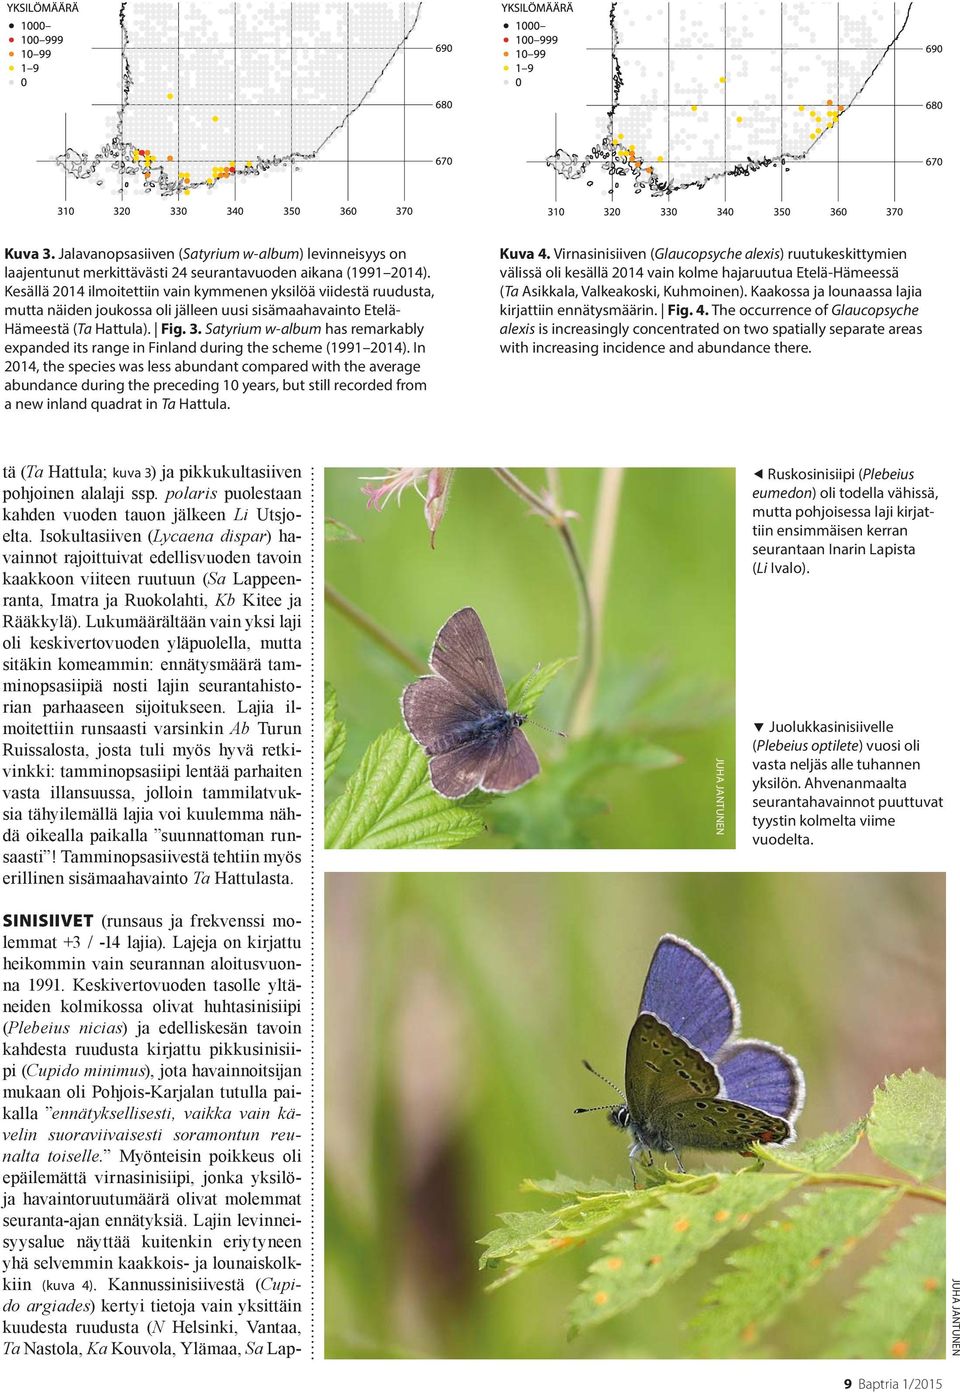 Satyrium w-album has remarkably expanded its range in Finland during the scheme (1991 2014).